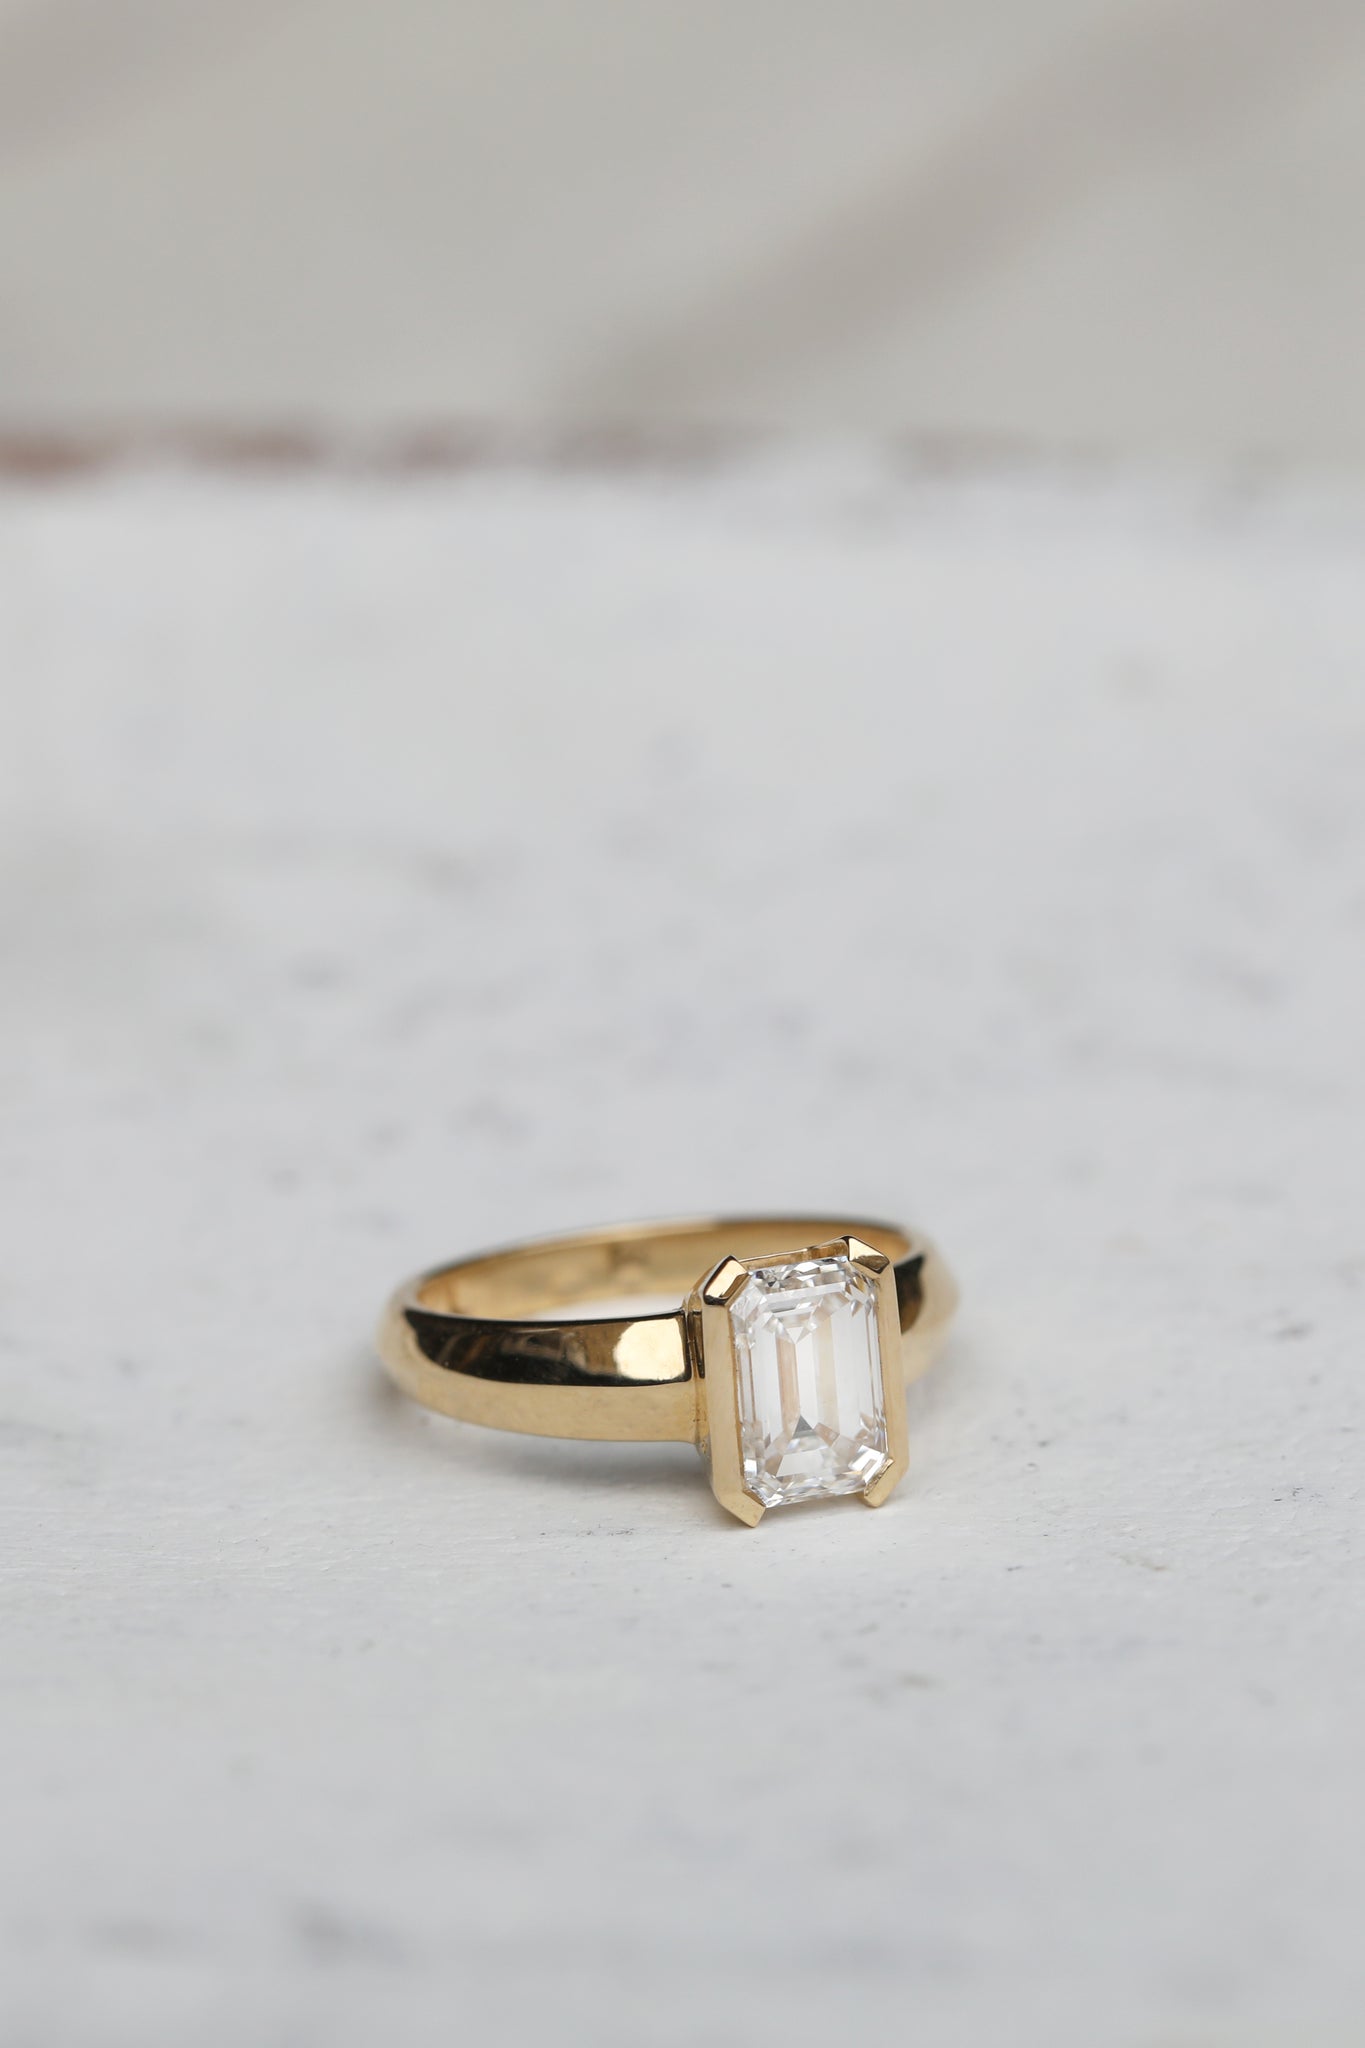 Emerald Cut Lab grown diamond for a bespoke engagement ring featuring chunky 18ct gold knife edge band and half bezel setting. Designed by East London jeweller Rachel Boston and crafted from start to finish in the UK.